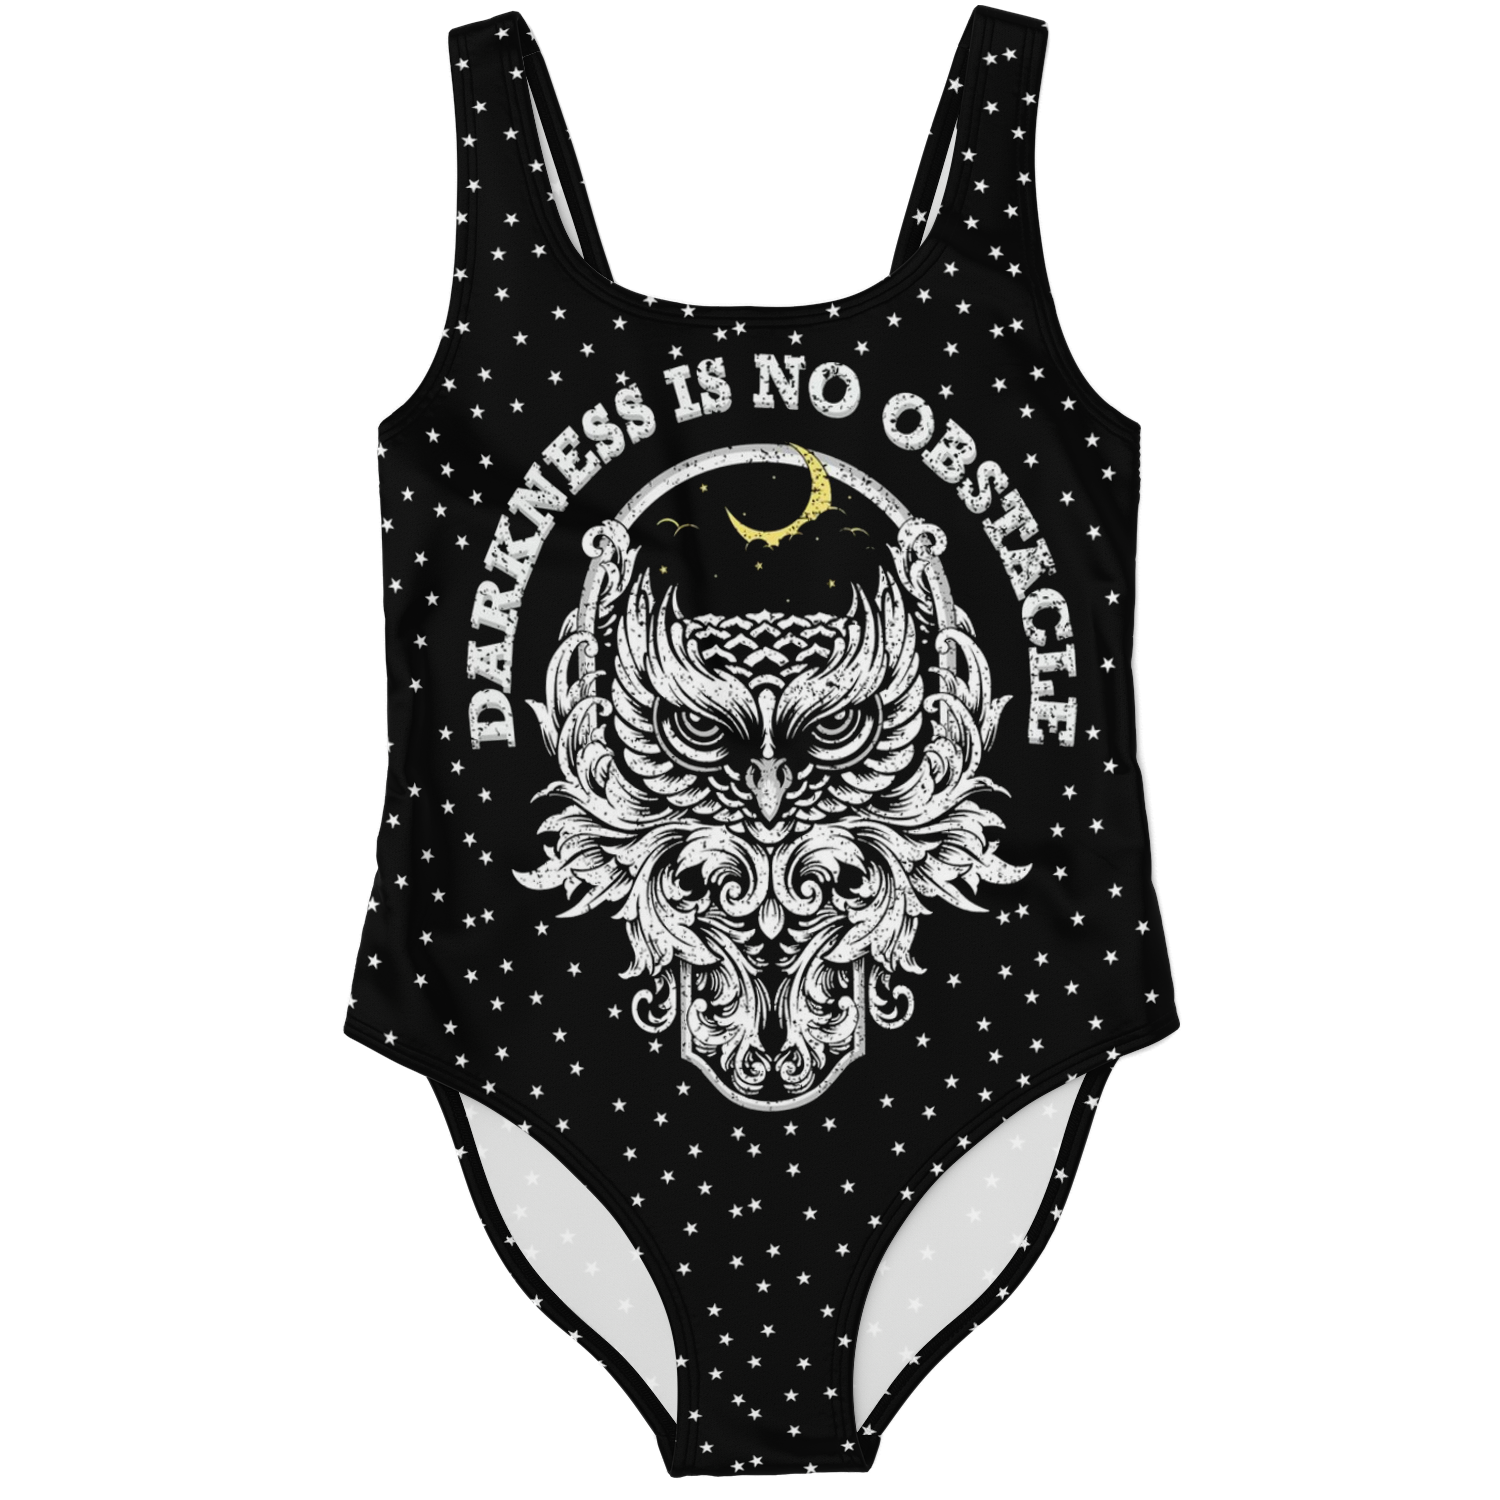 Darkness is no obstacle Swimsuit - NeoSkull